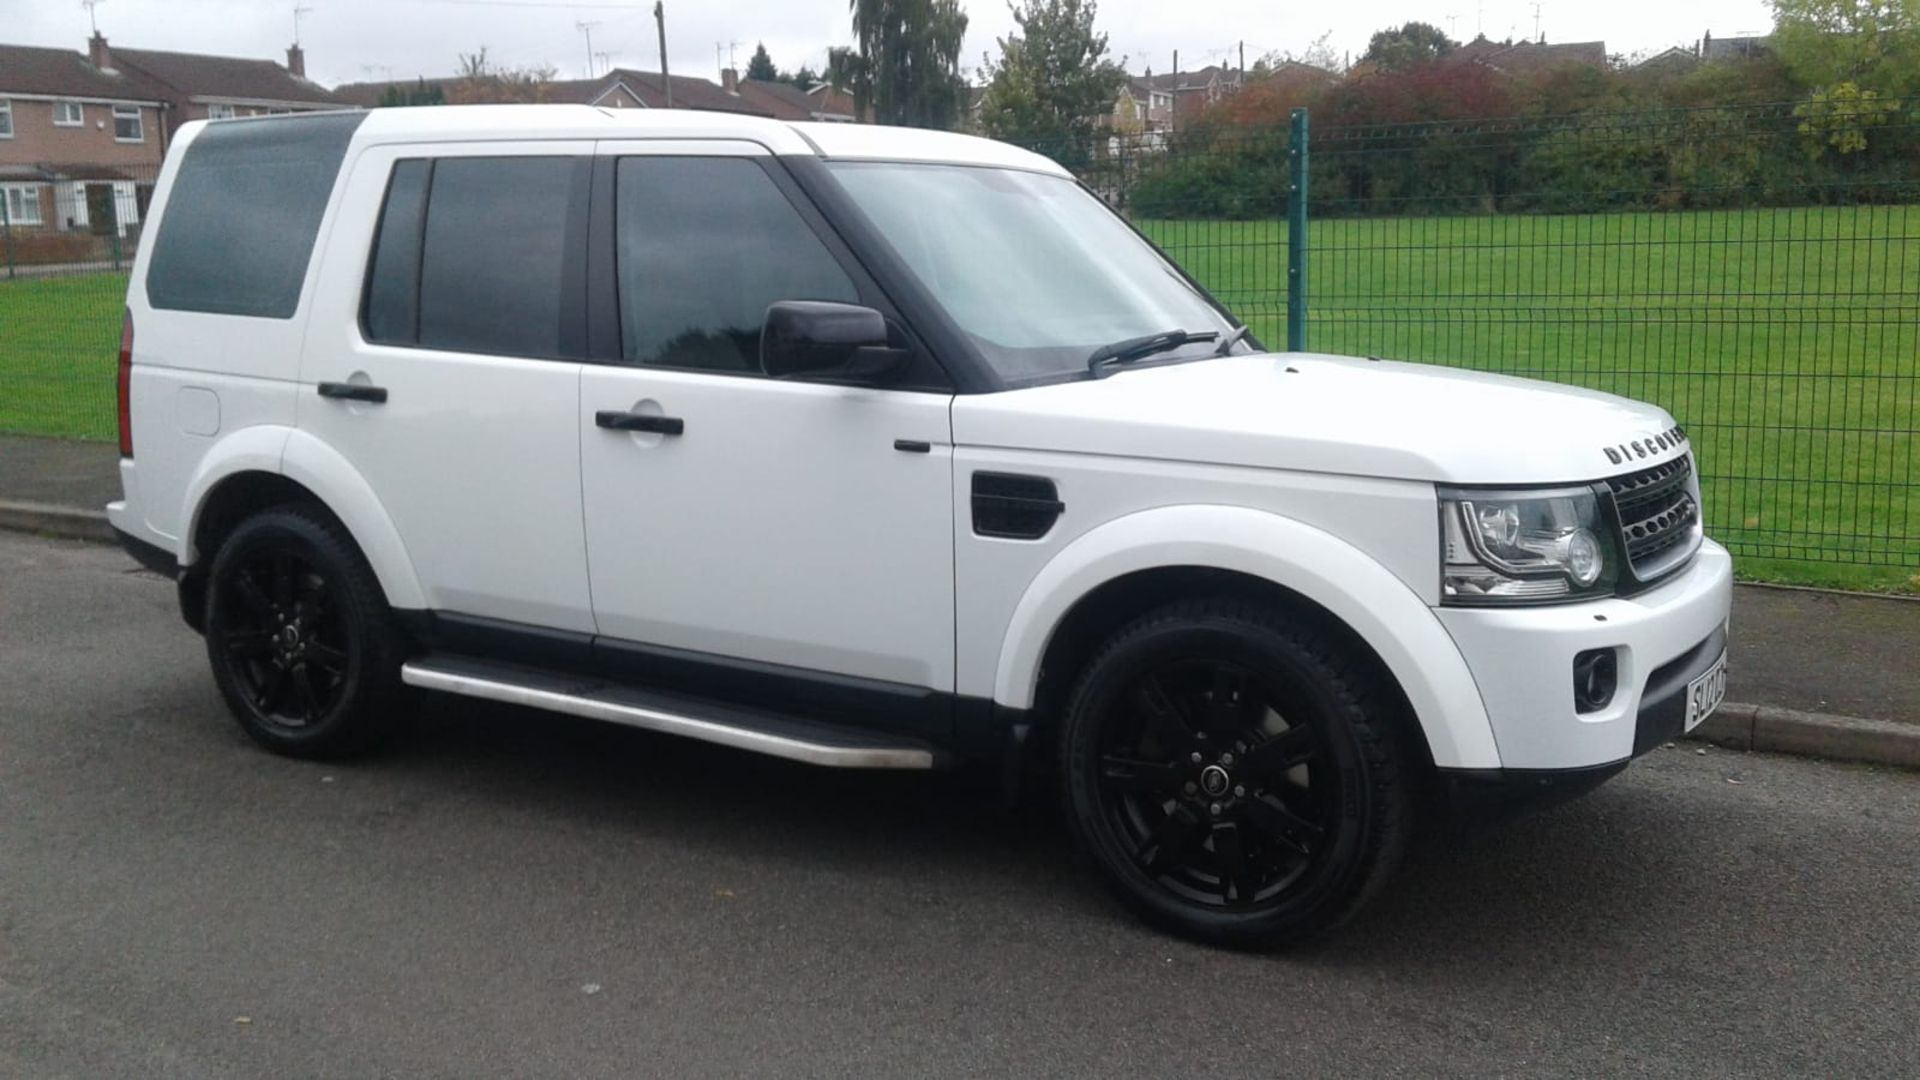 2012/12 REG LAND ROVER DISCOVERY GS SDV6 AUTOMATIC 3.0 DIESEL 4X4, GOOD SERVICE HISTORY *NO VAT*